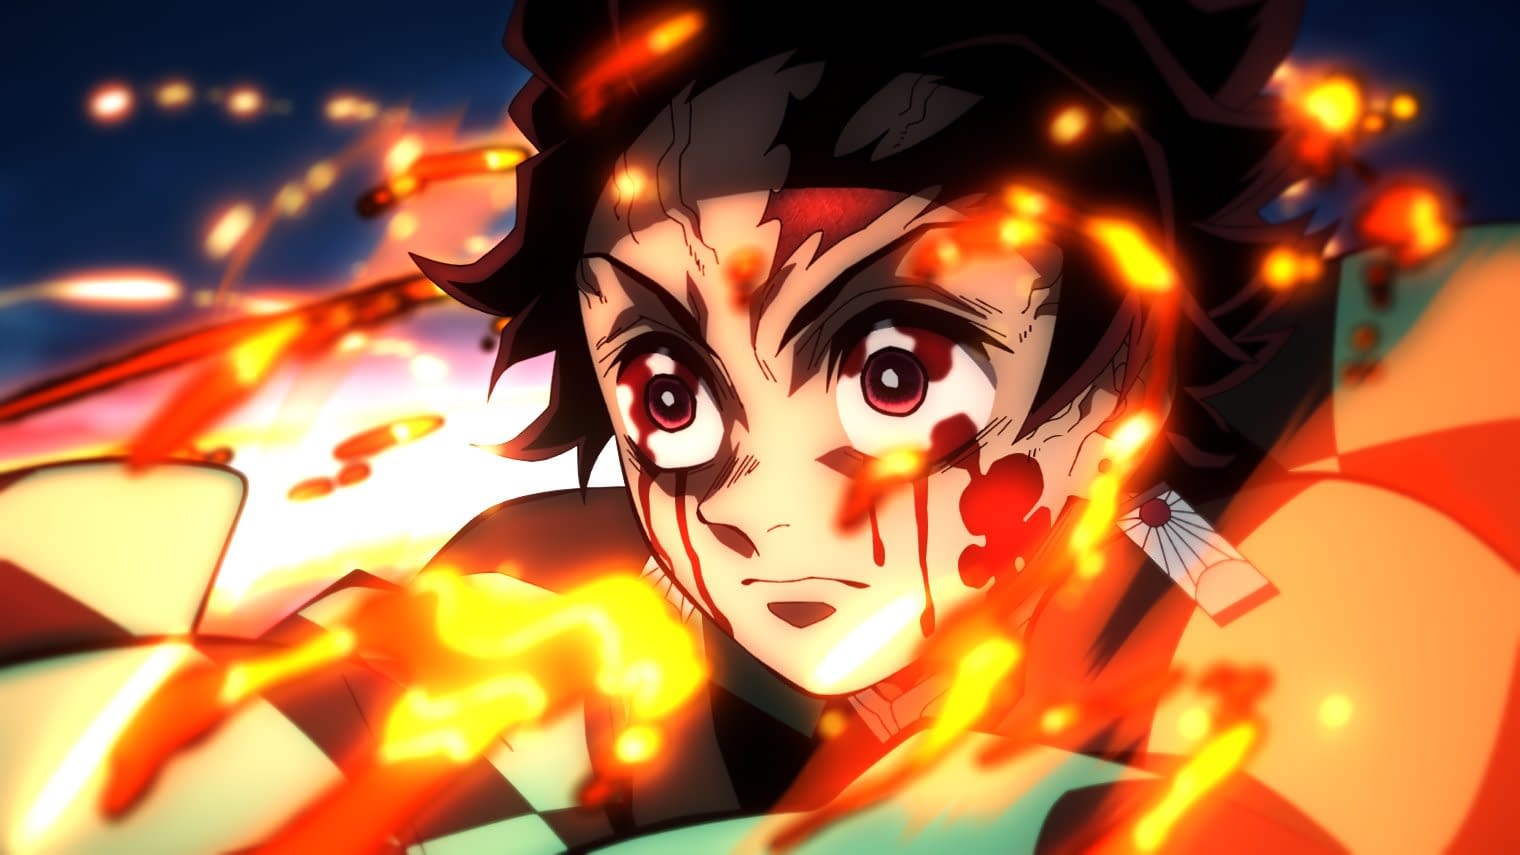 Demon Slayer Season 2 Episode 3 - What Are You? Review